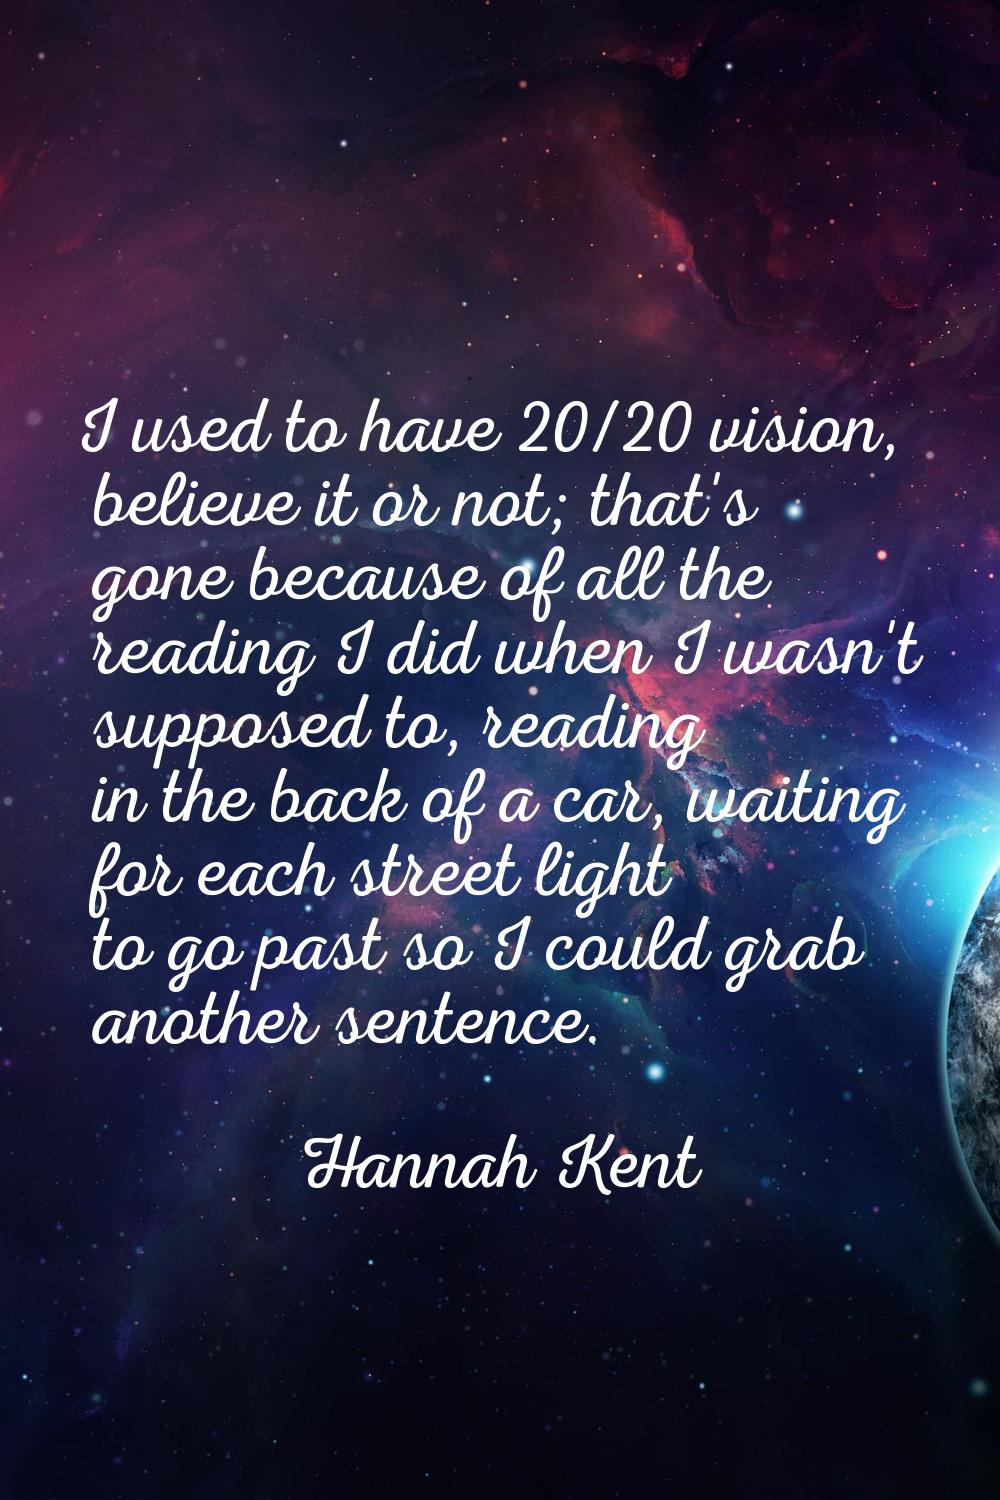 I used to have 20/20 vision, believe it or not; that's gone because of all the reading I did when I